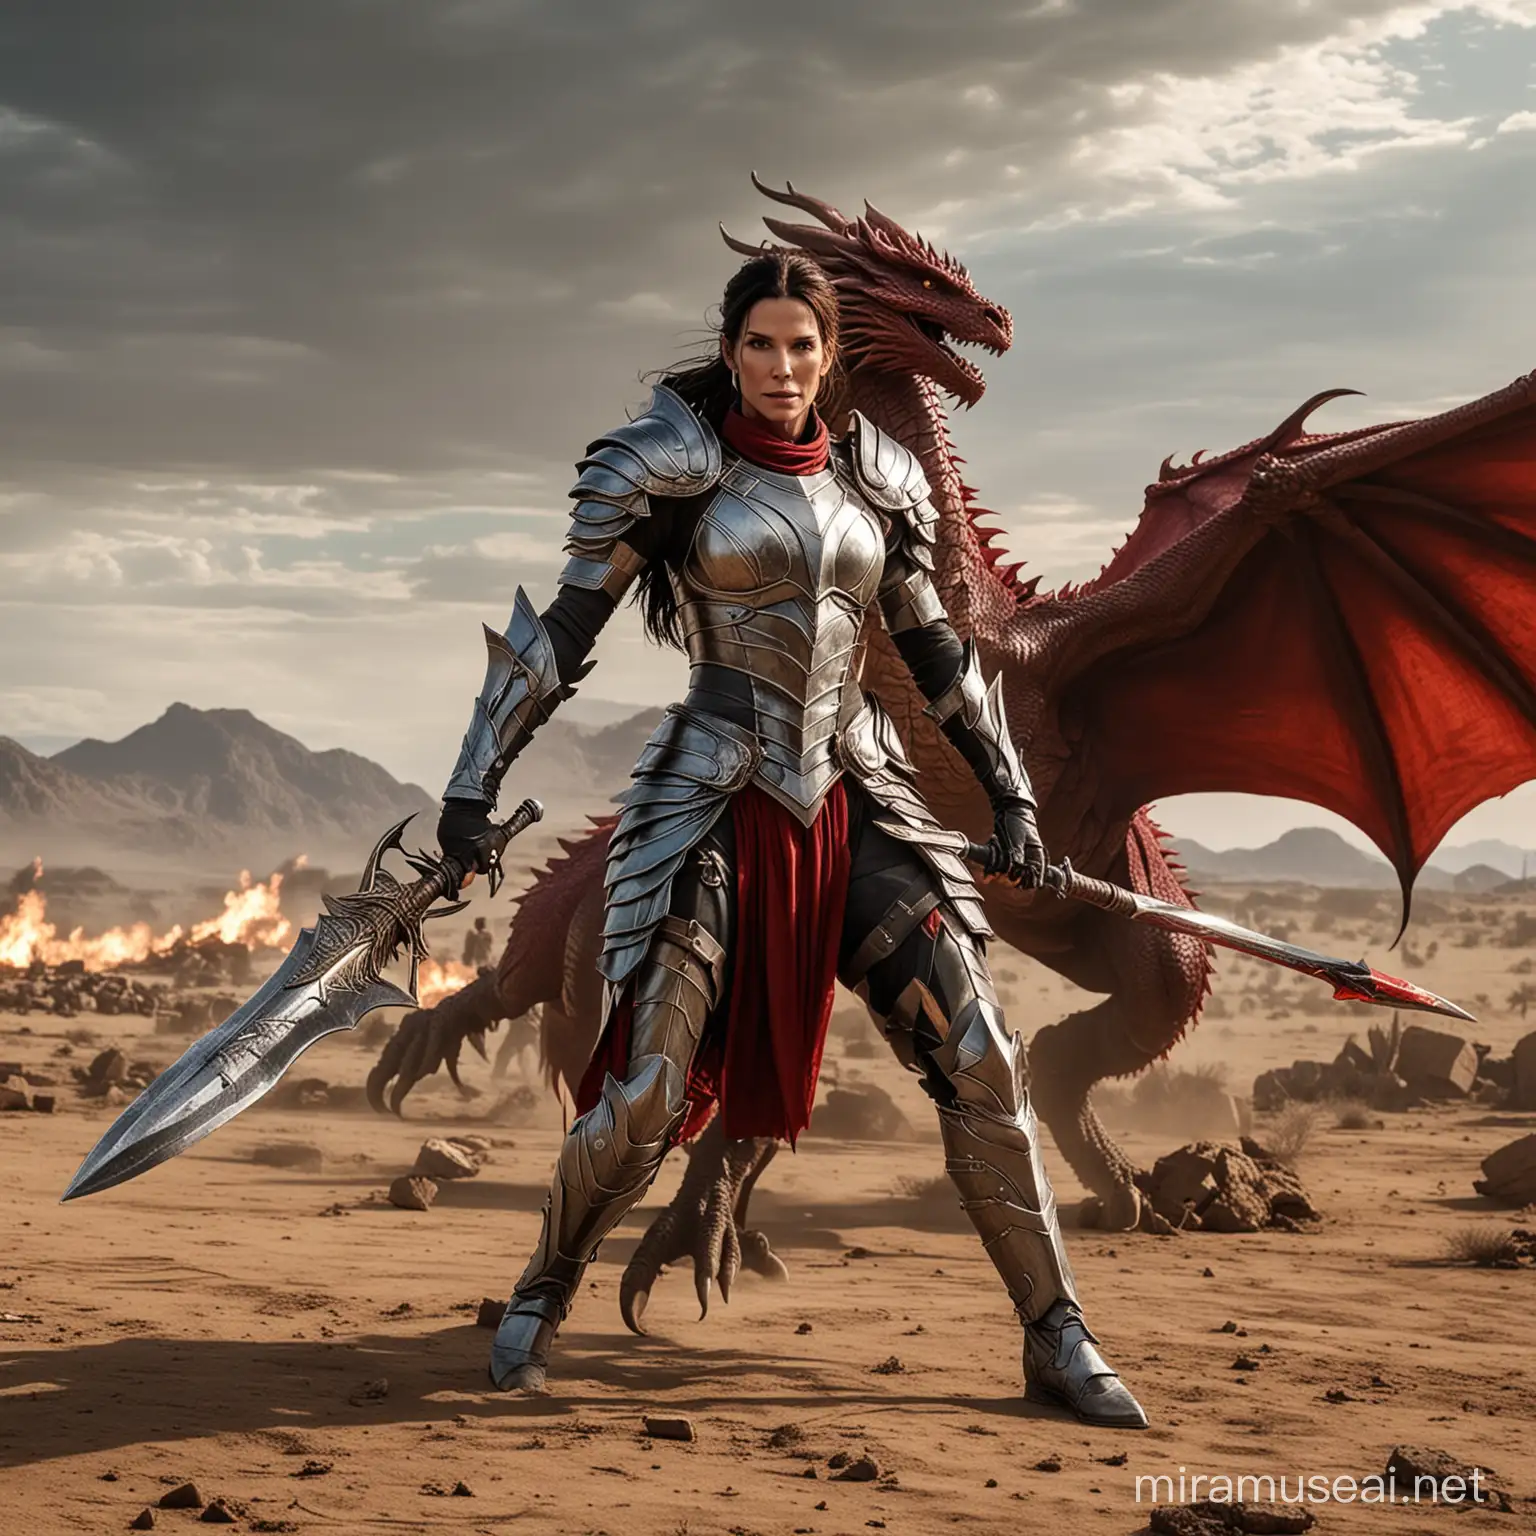 Sandra Bullock dressed in plate armor holding a spear infront of a red dragon in a battlefield